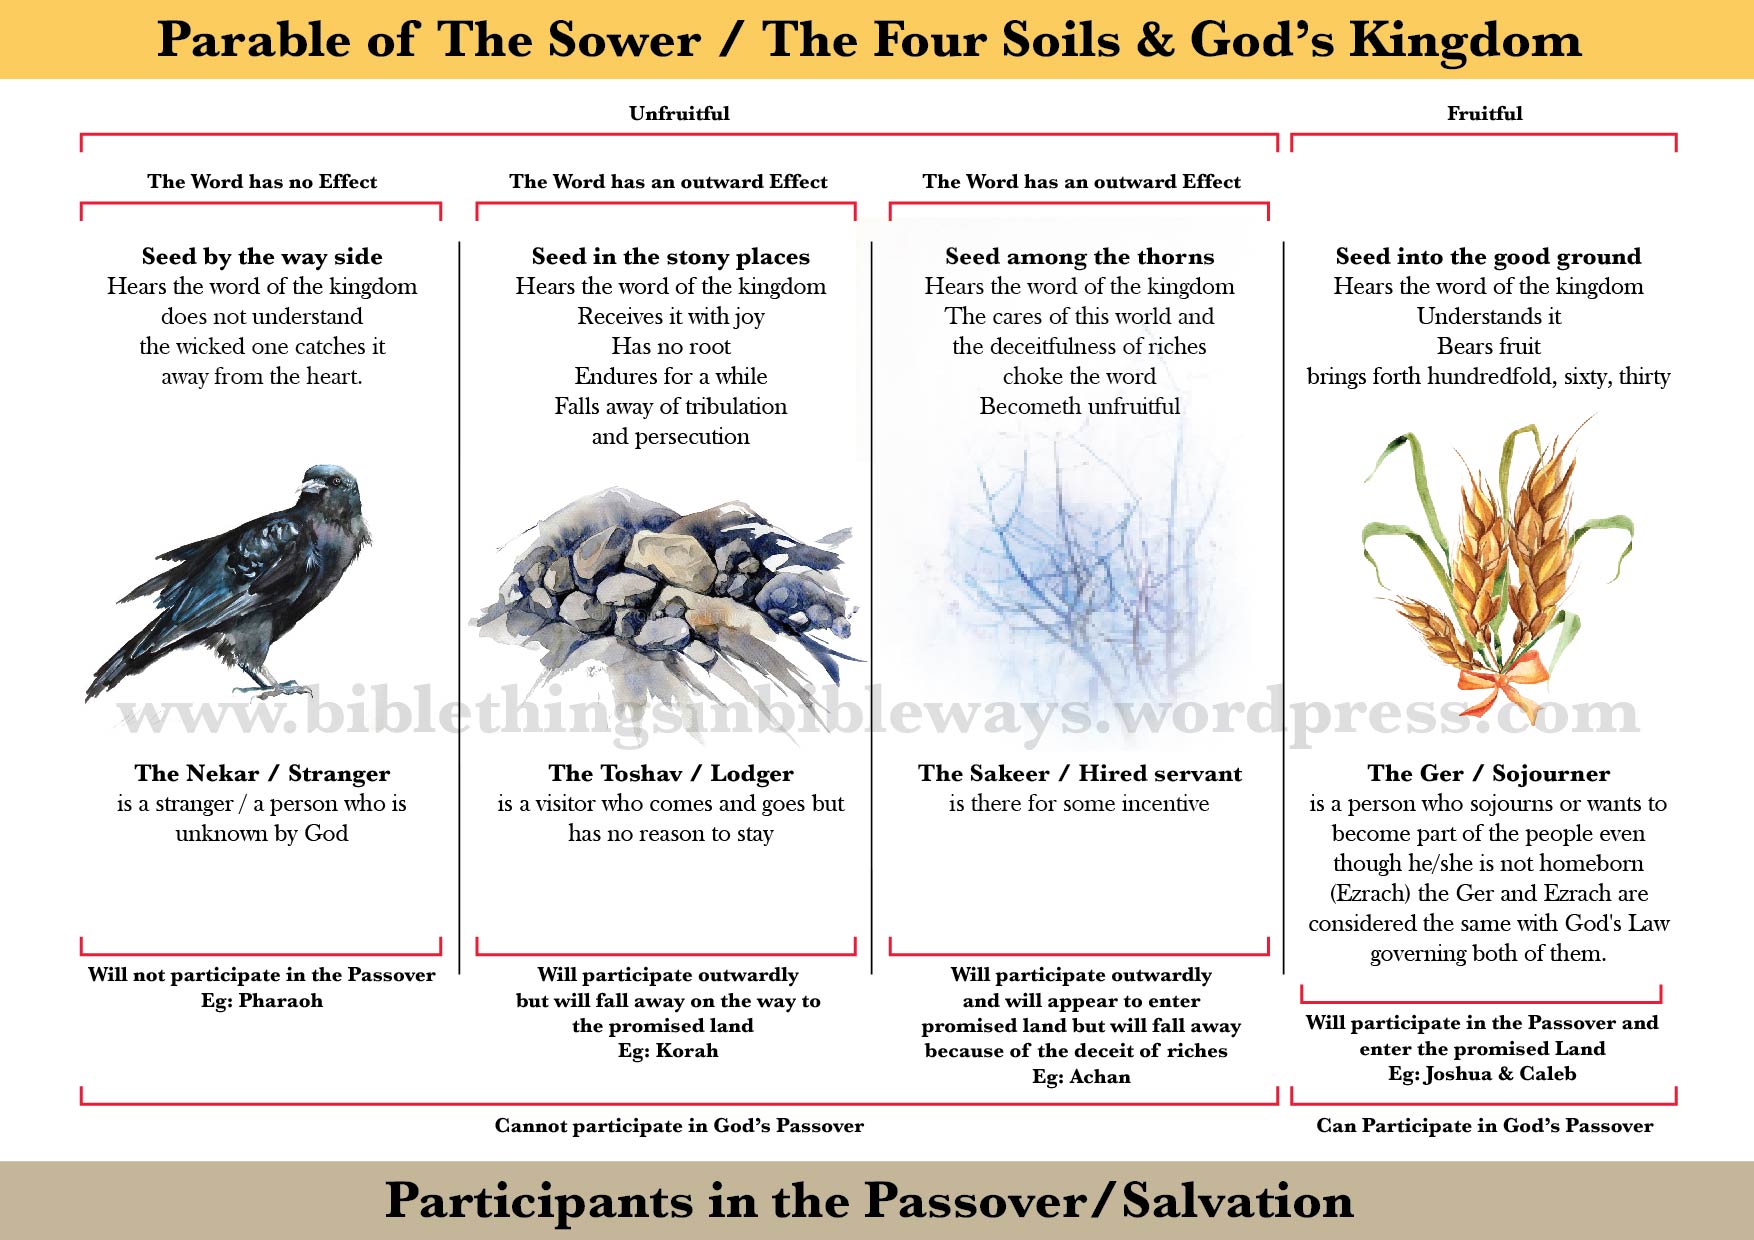 Bible ways The and Passover the the Bible of in things Sower Parable |